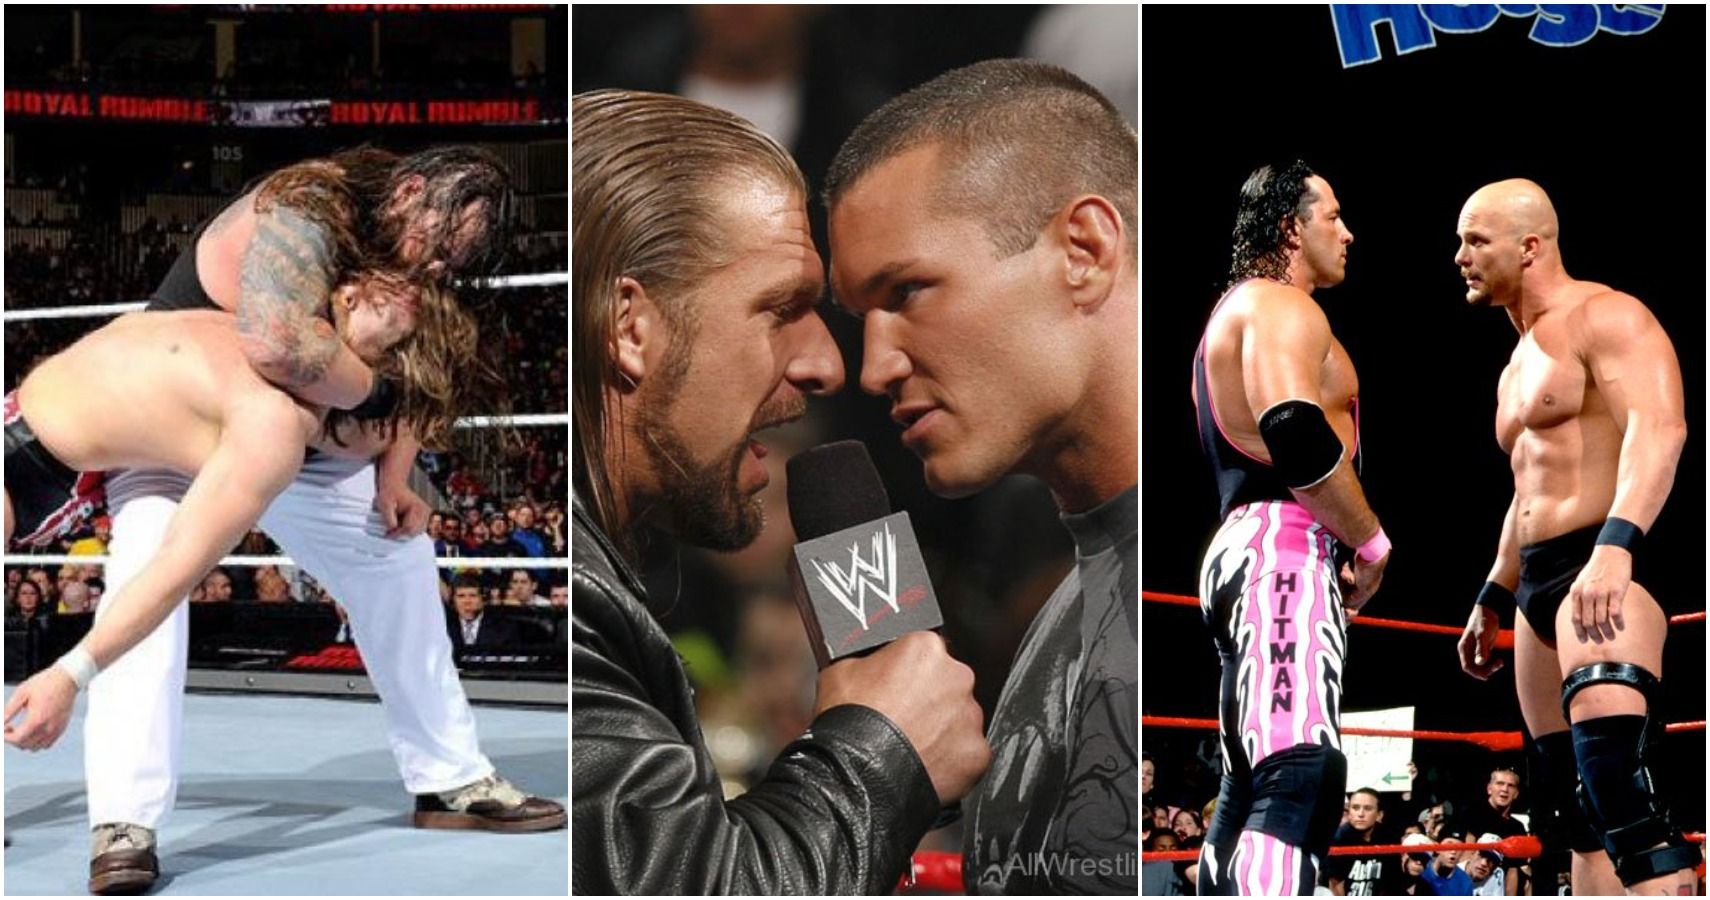 10 Feuds You Didn't Realize The Heel Won